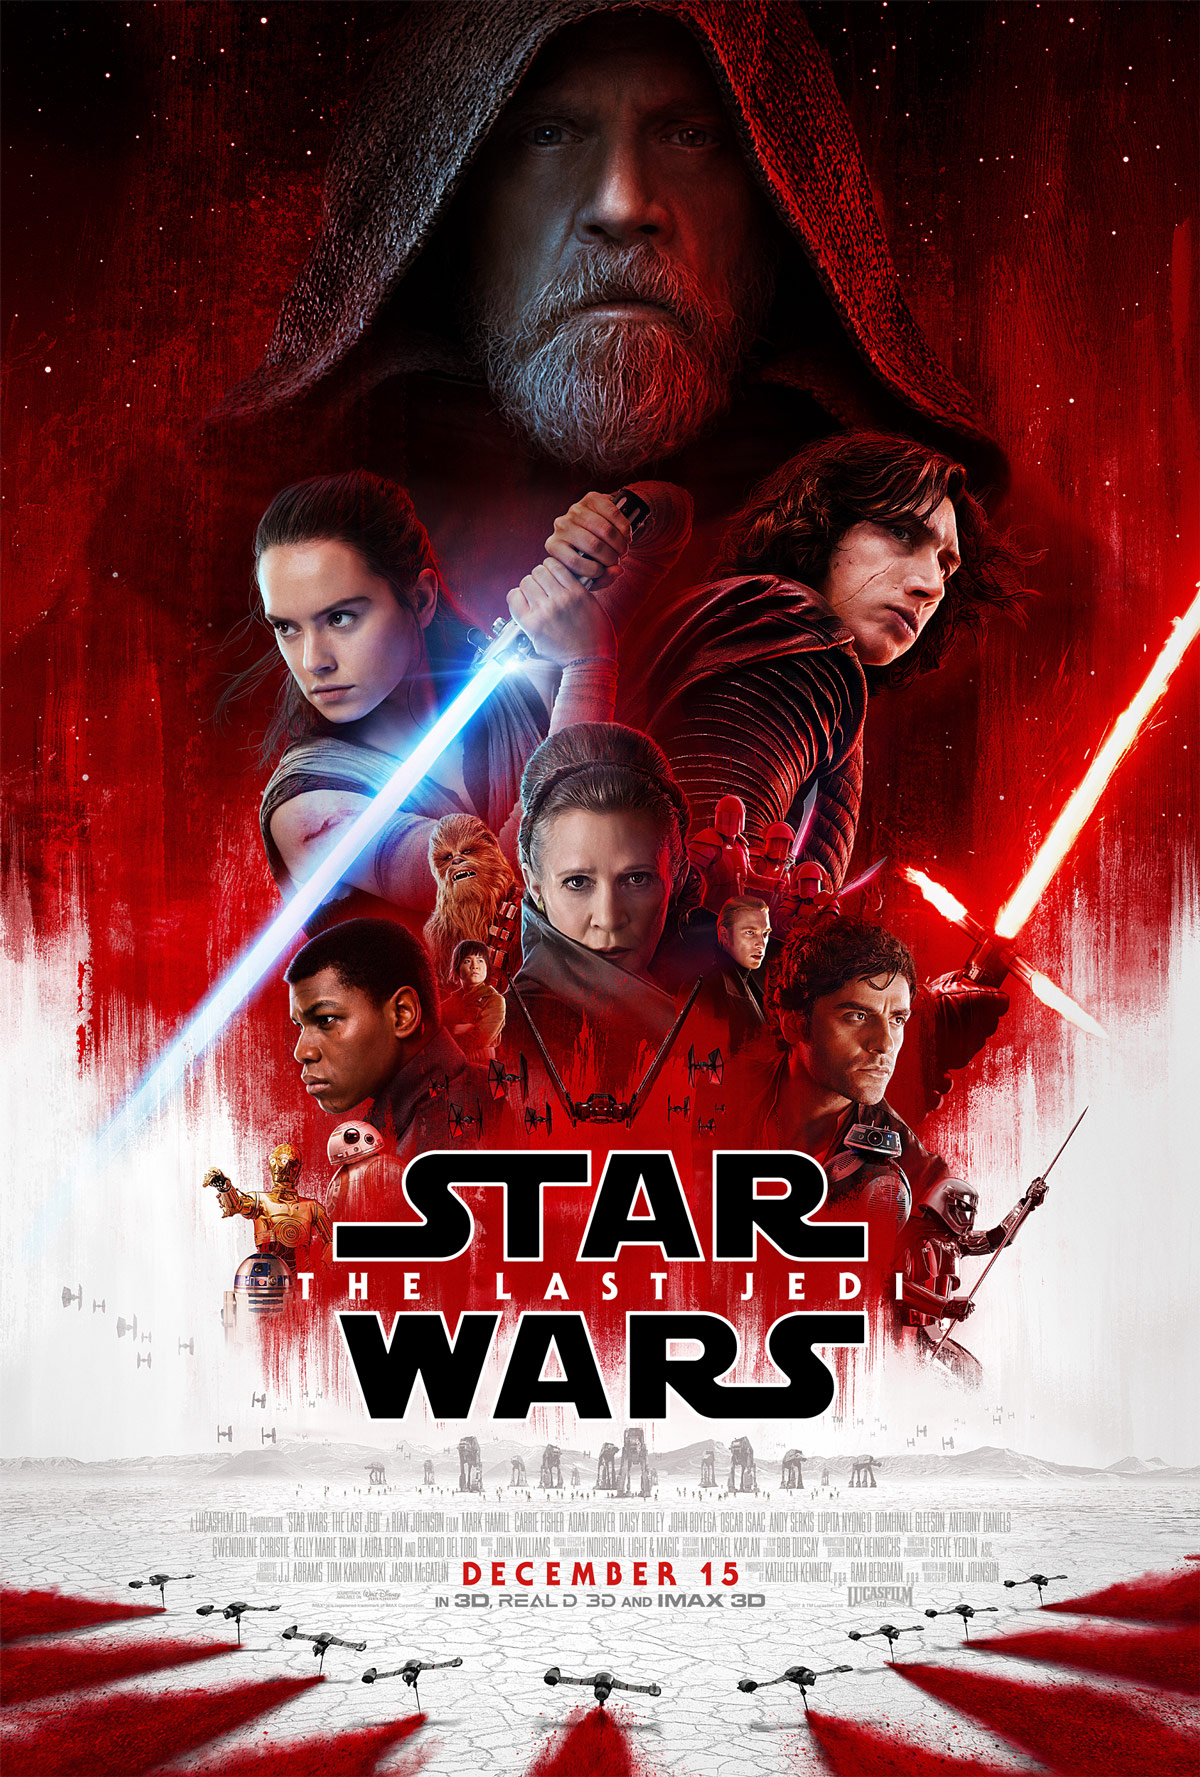 "Star Wars: The Last Jedi" with The Hit House's work on music arrangements for the campaign.